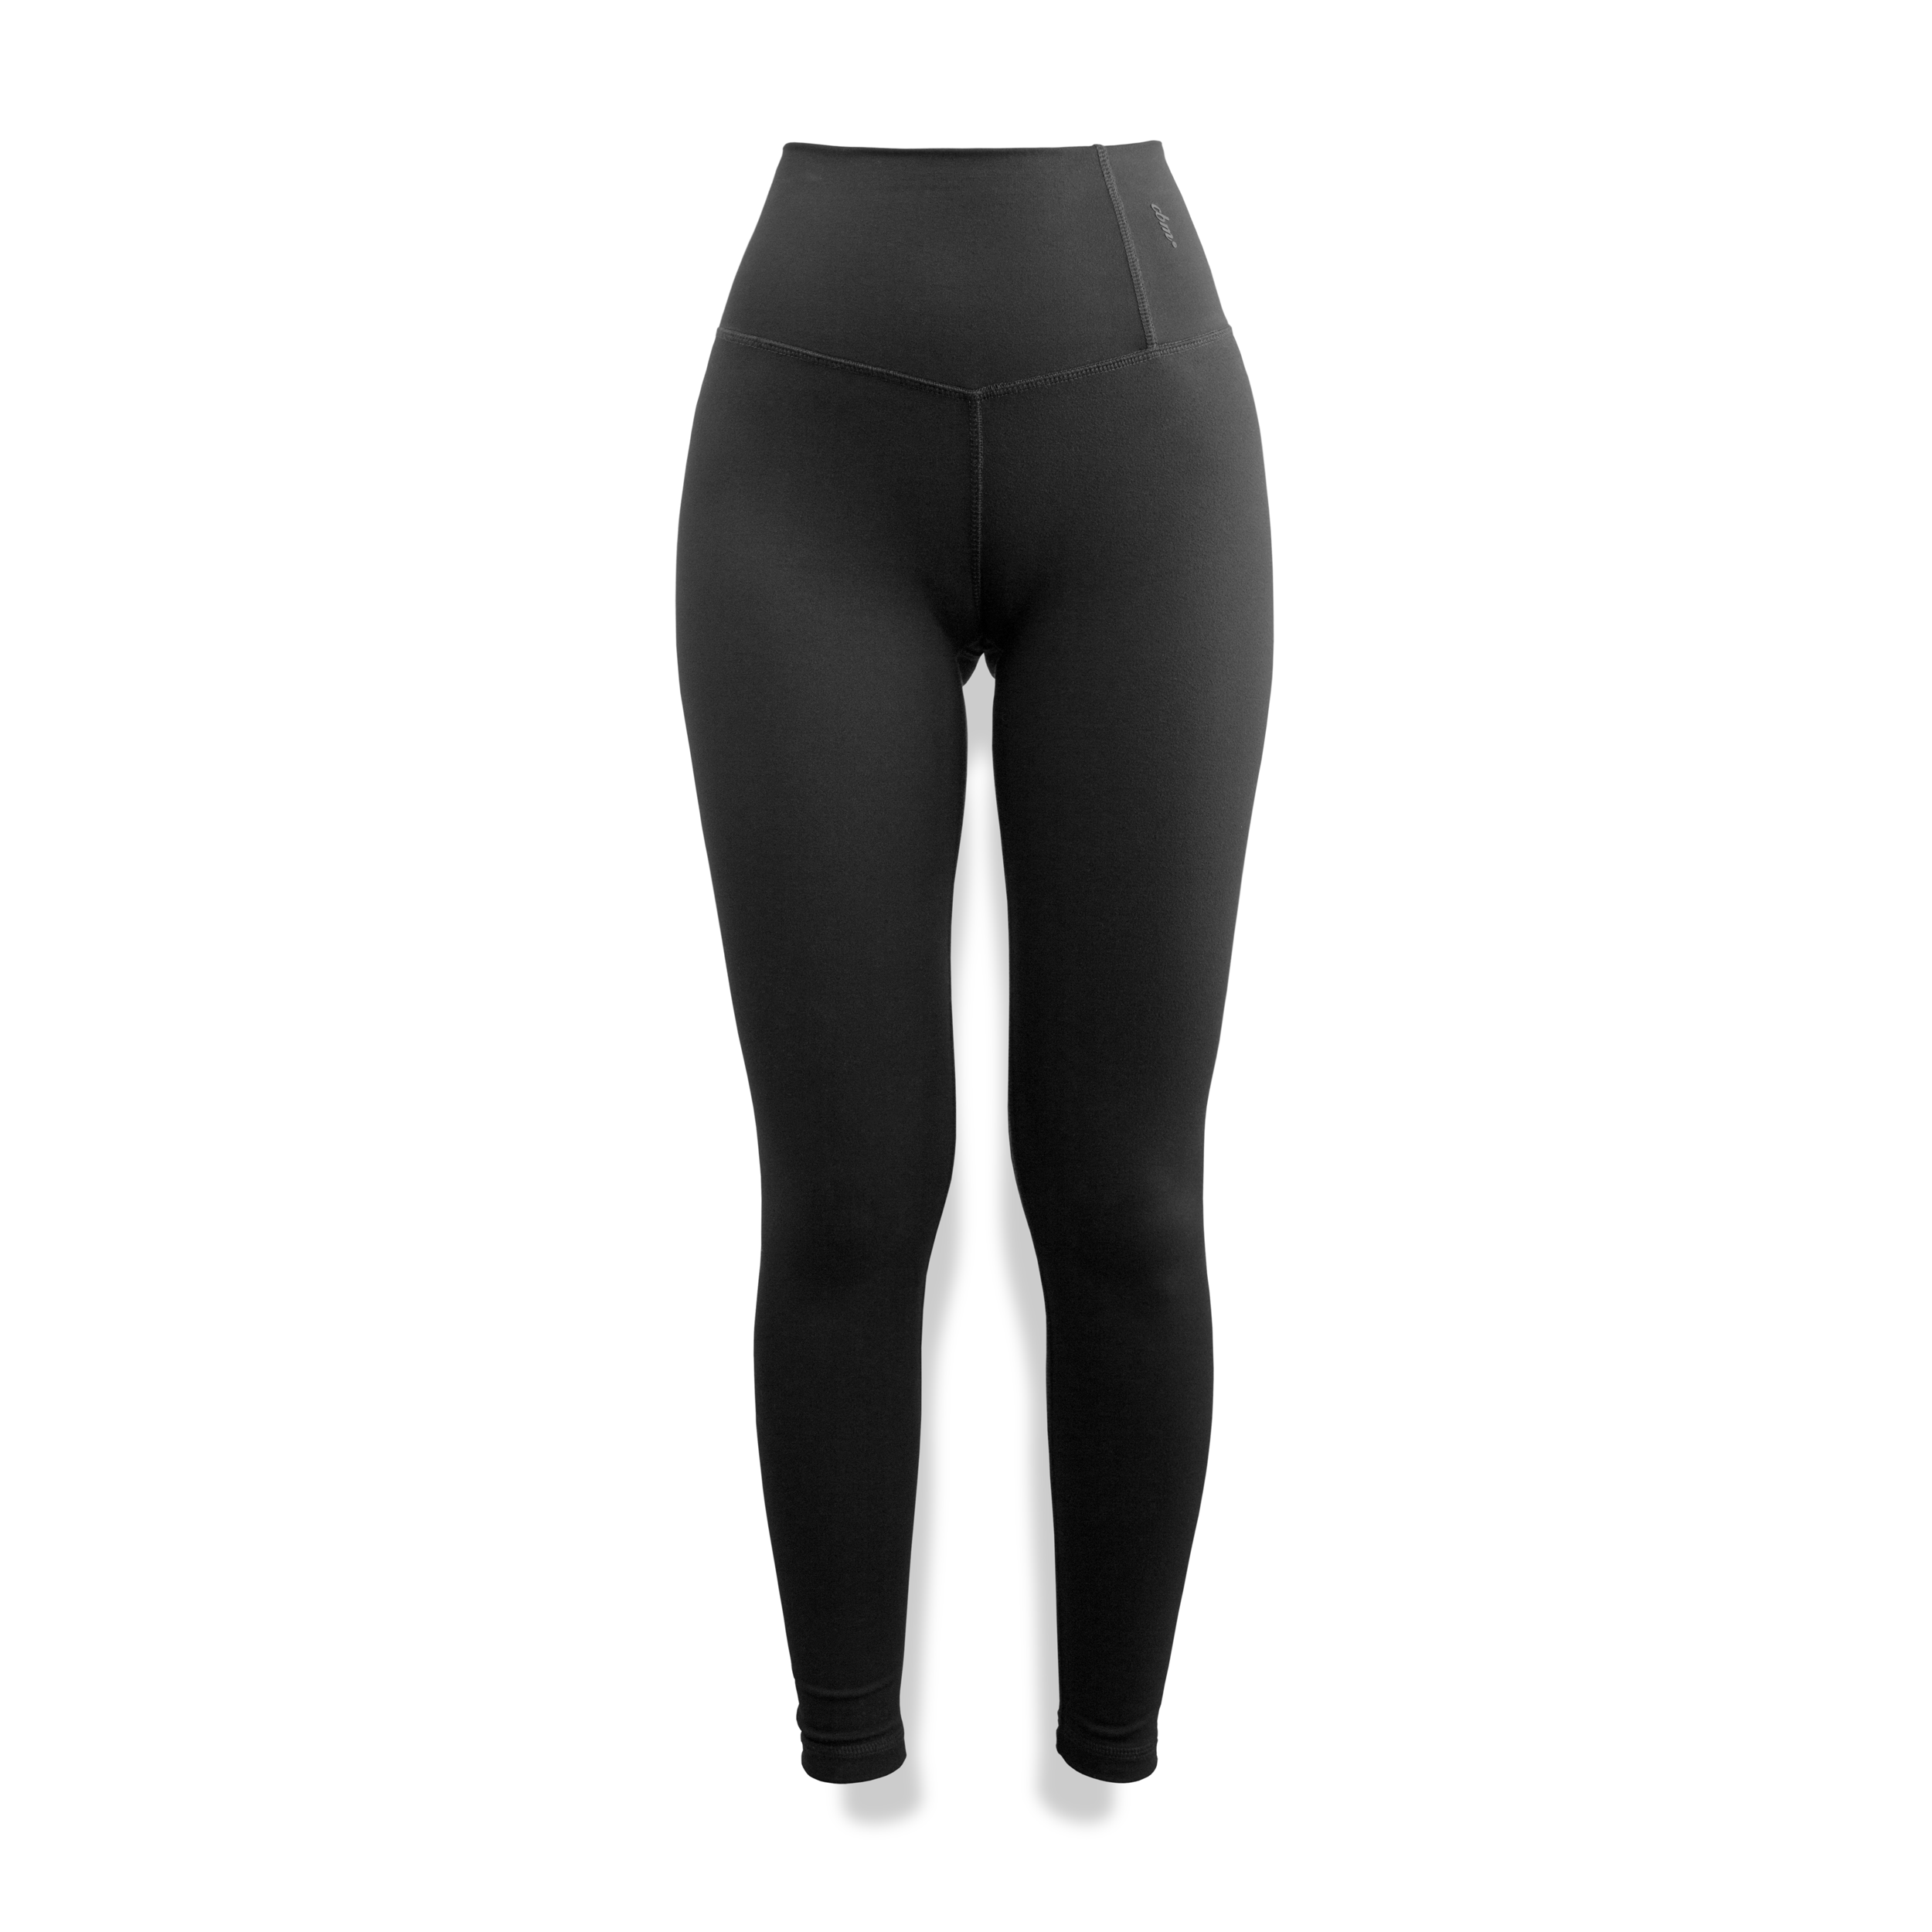 Running Bare Muse 3/4 Tight. Black Cross Front Workout Leggings.